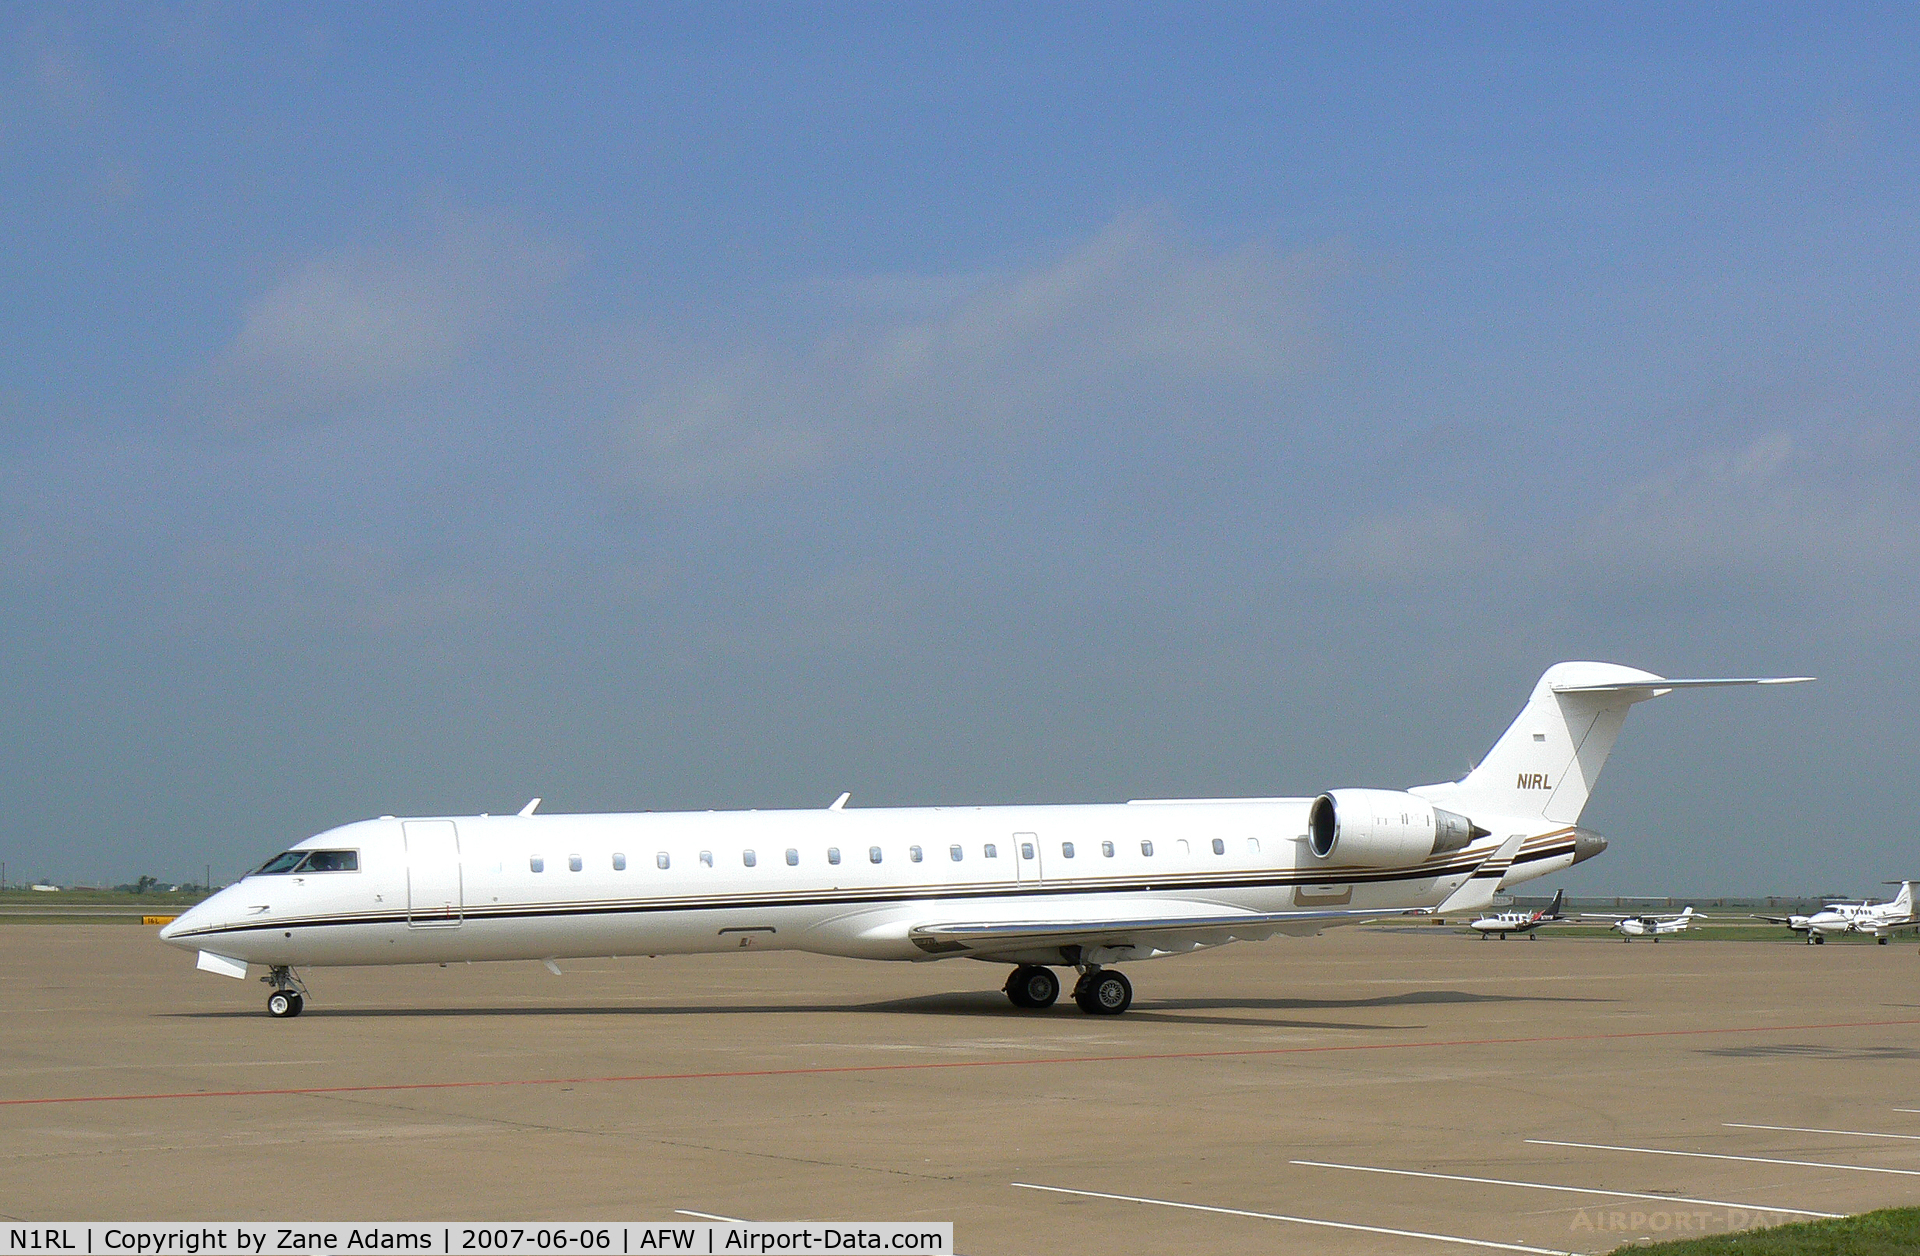 N1RL, 1999 Bombardier CRJ-700 (CL-600-2C10) Regional Jet C/N 10004, Indy Racing League officials transport arrives for race weekend at Texas Motor Speedway